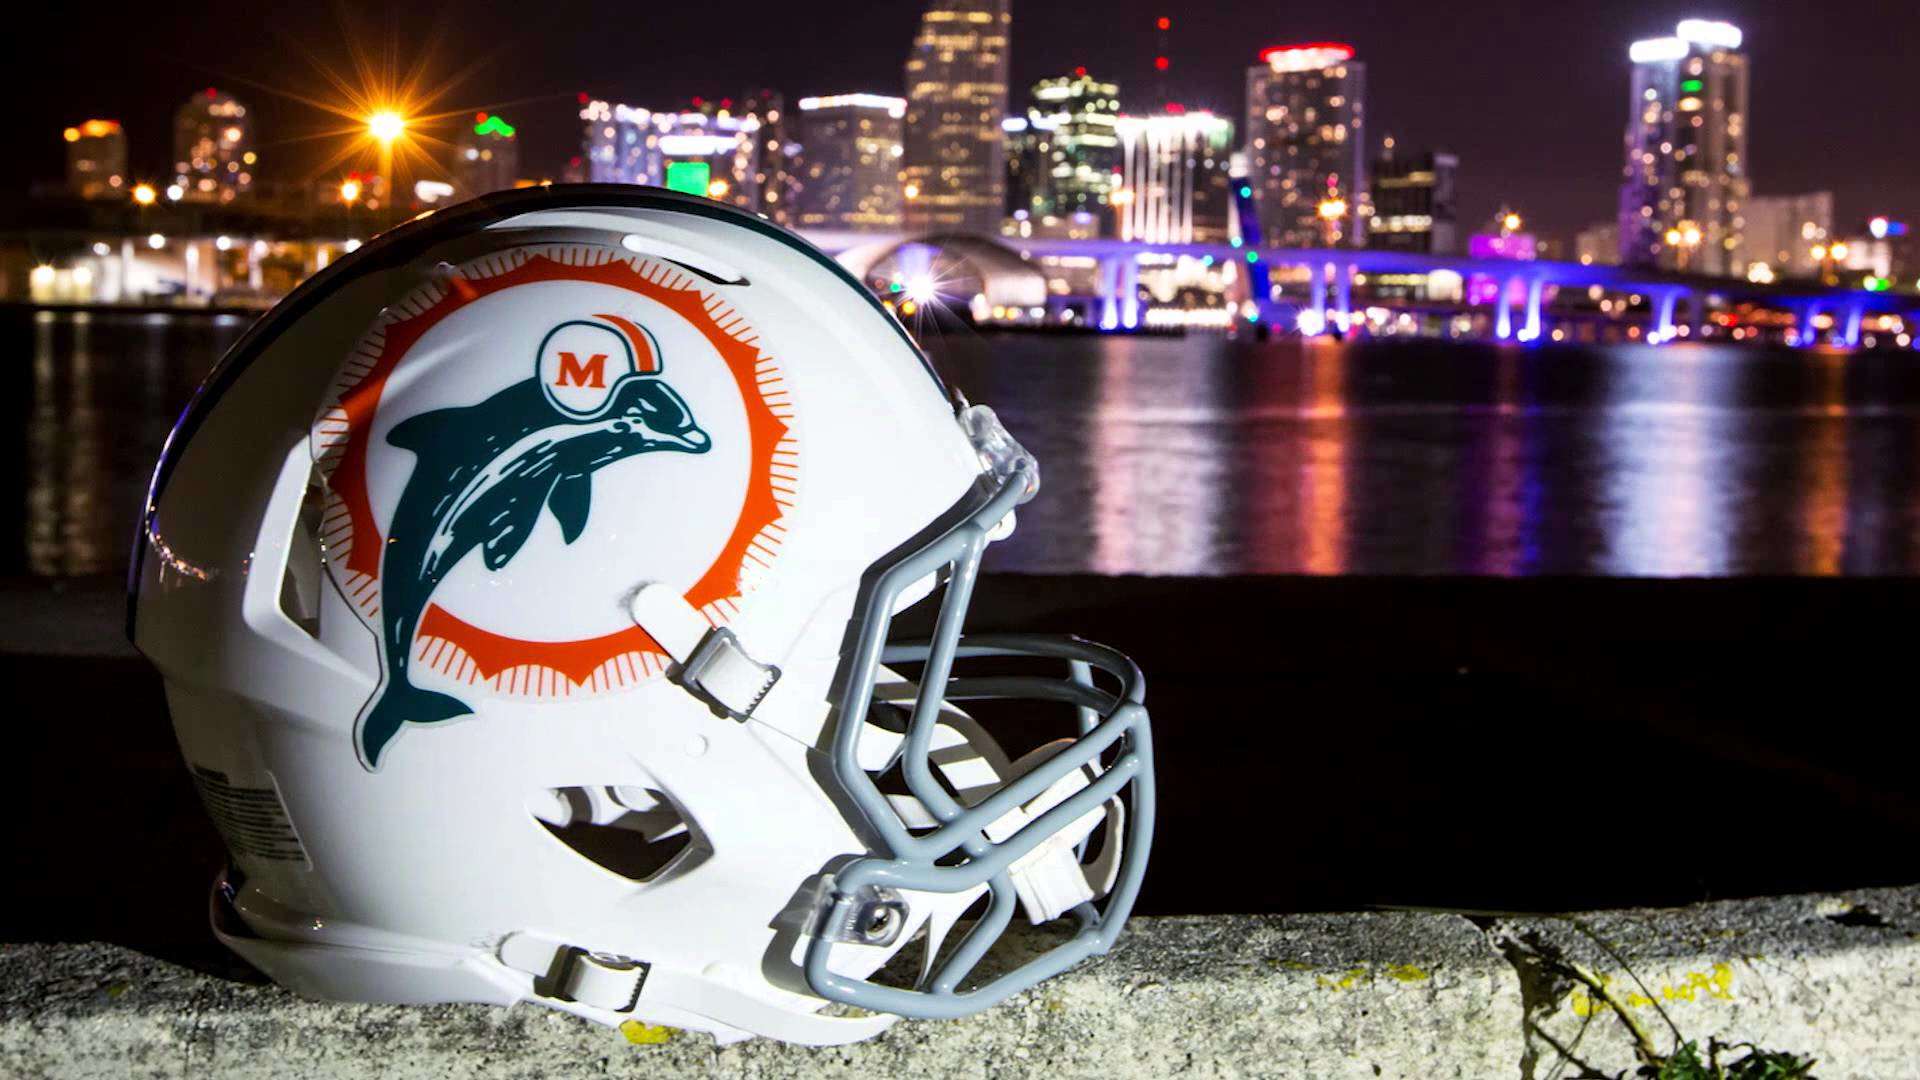 Miami Dolphins To Wear Throwback Uniforms Against Bills